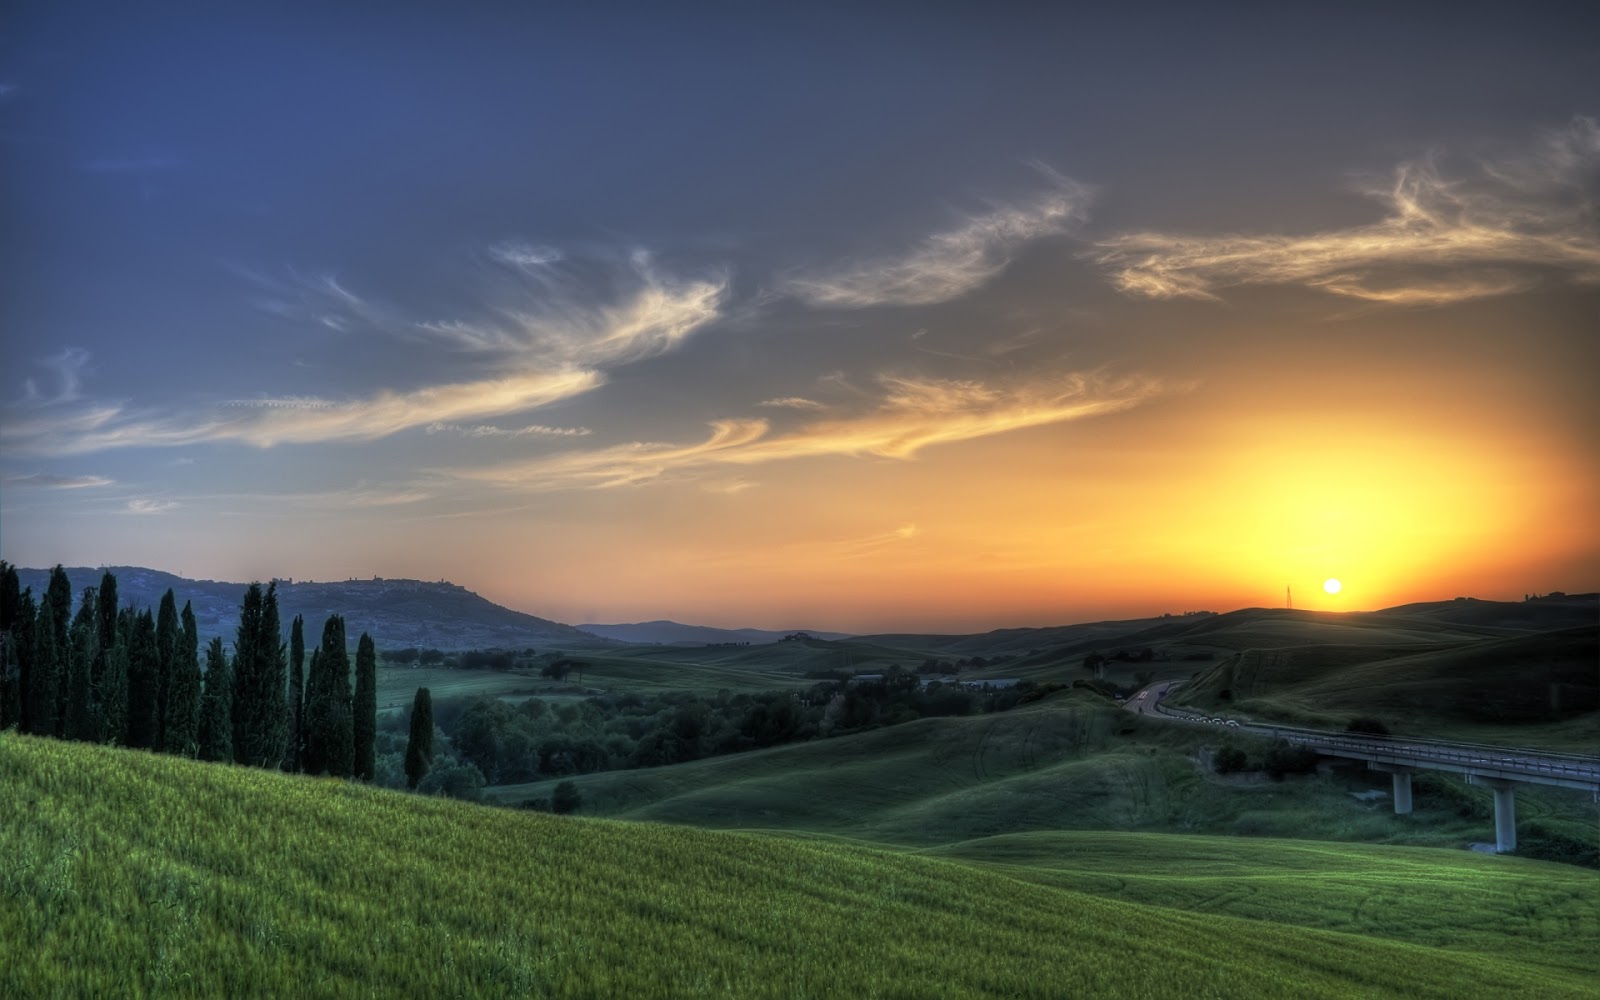 Tuscany Landscape, Italy [11 Pic] ~ Awesome Pictures